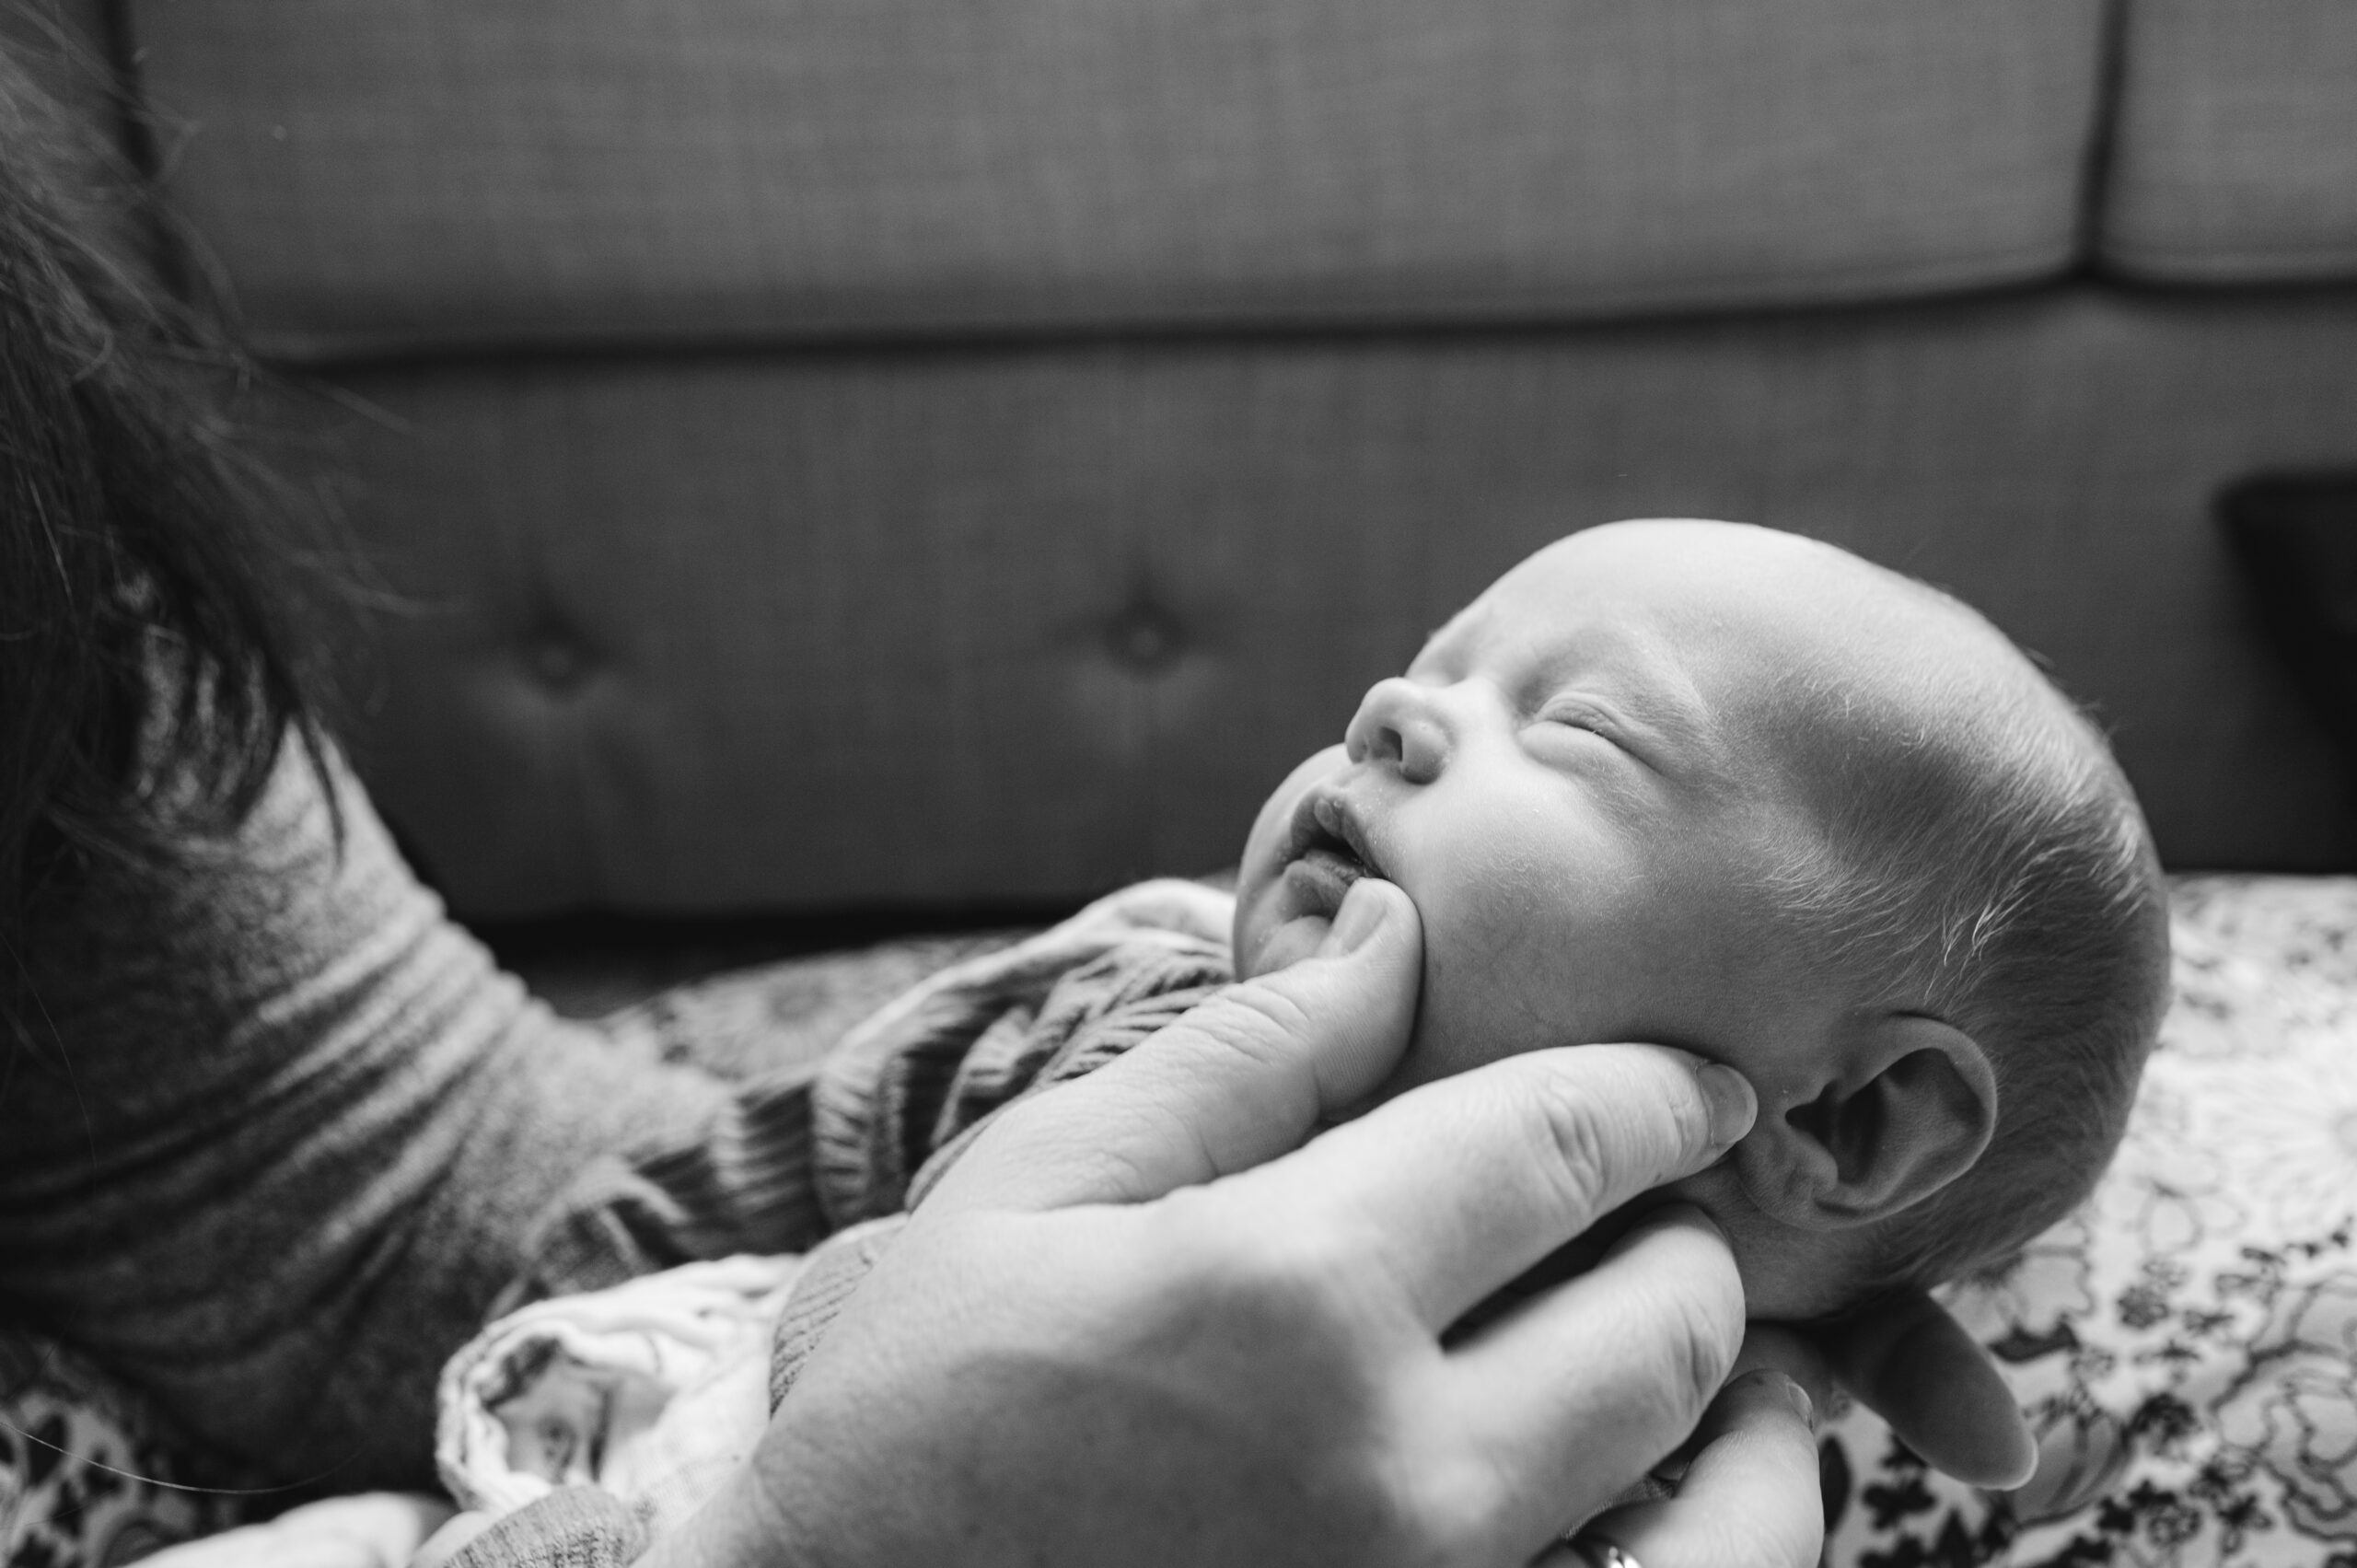 Mom wipes dried milk from newborns face during in-home lifestyle photography session.